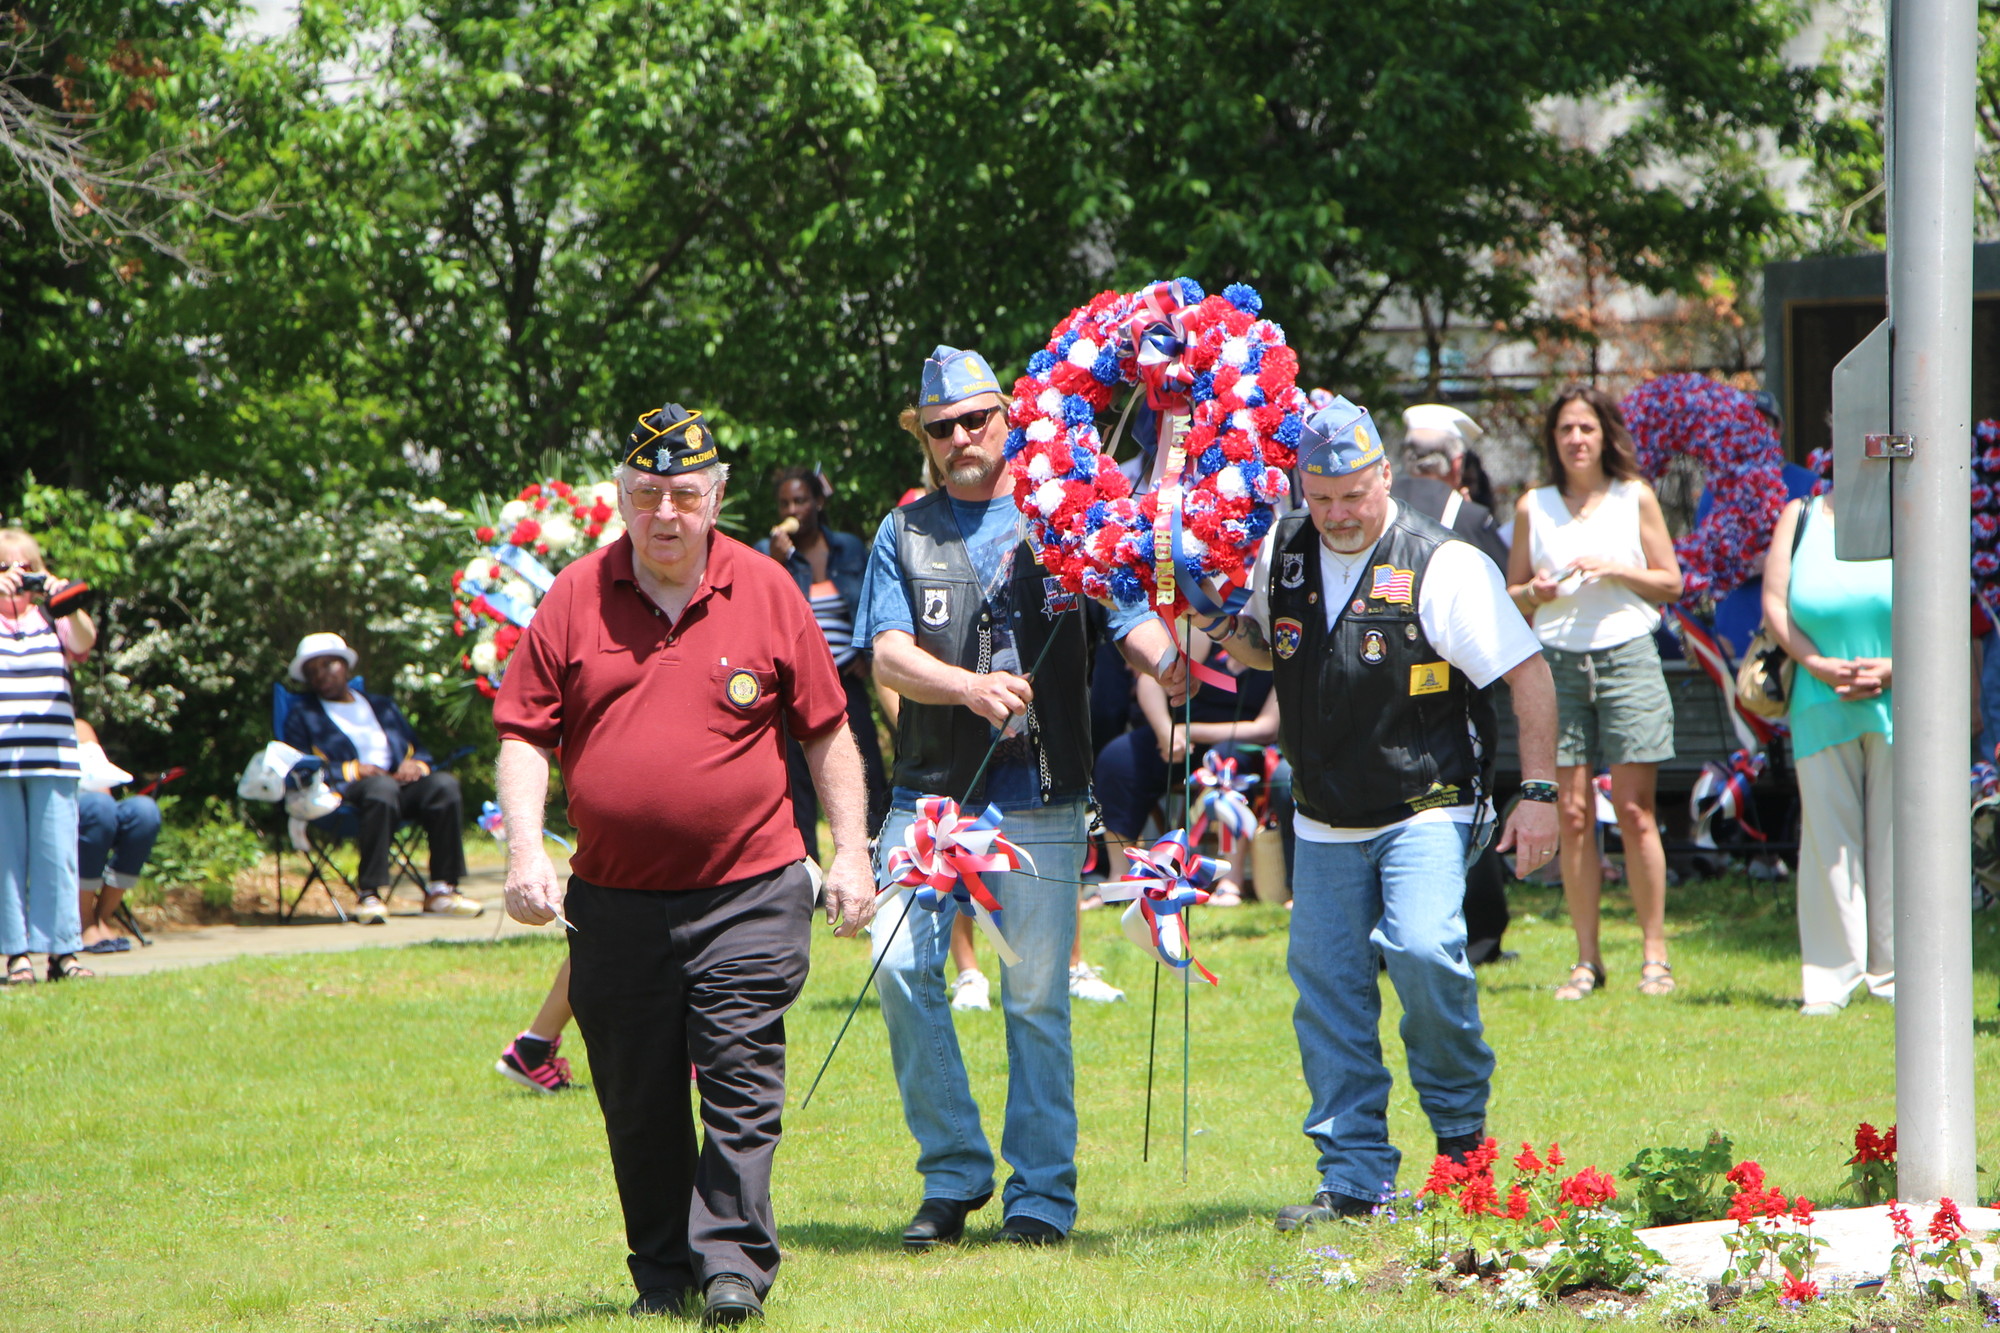 Members of Baldwin American Legion Post 246 laid wreaths at Silver Lake Park to honor veterans who lost their lives.